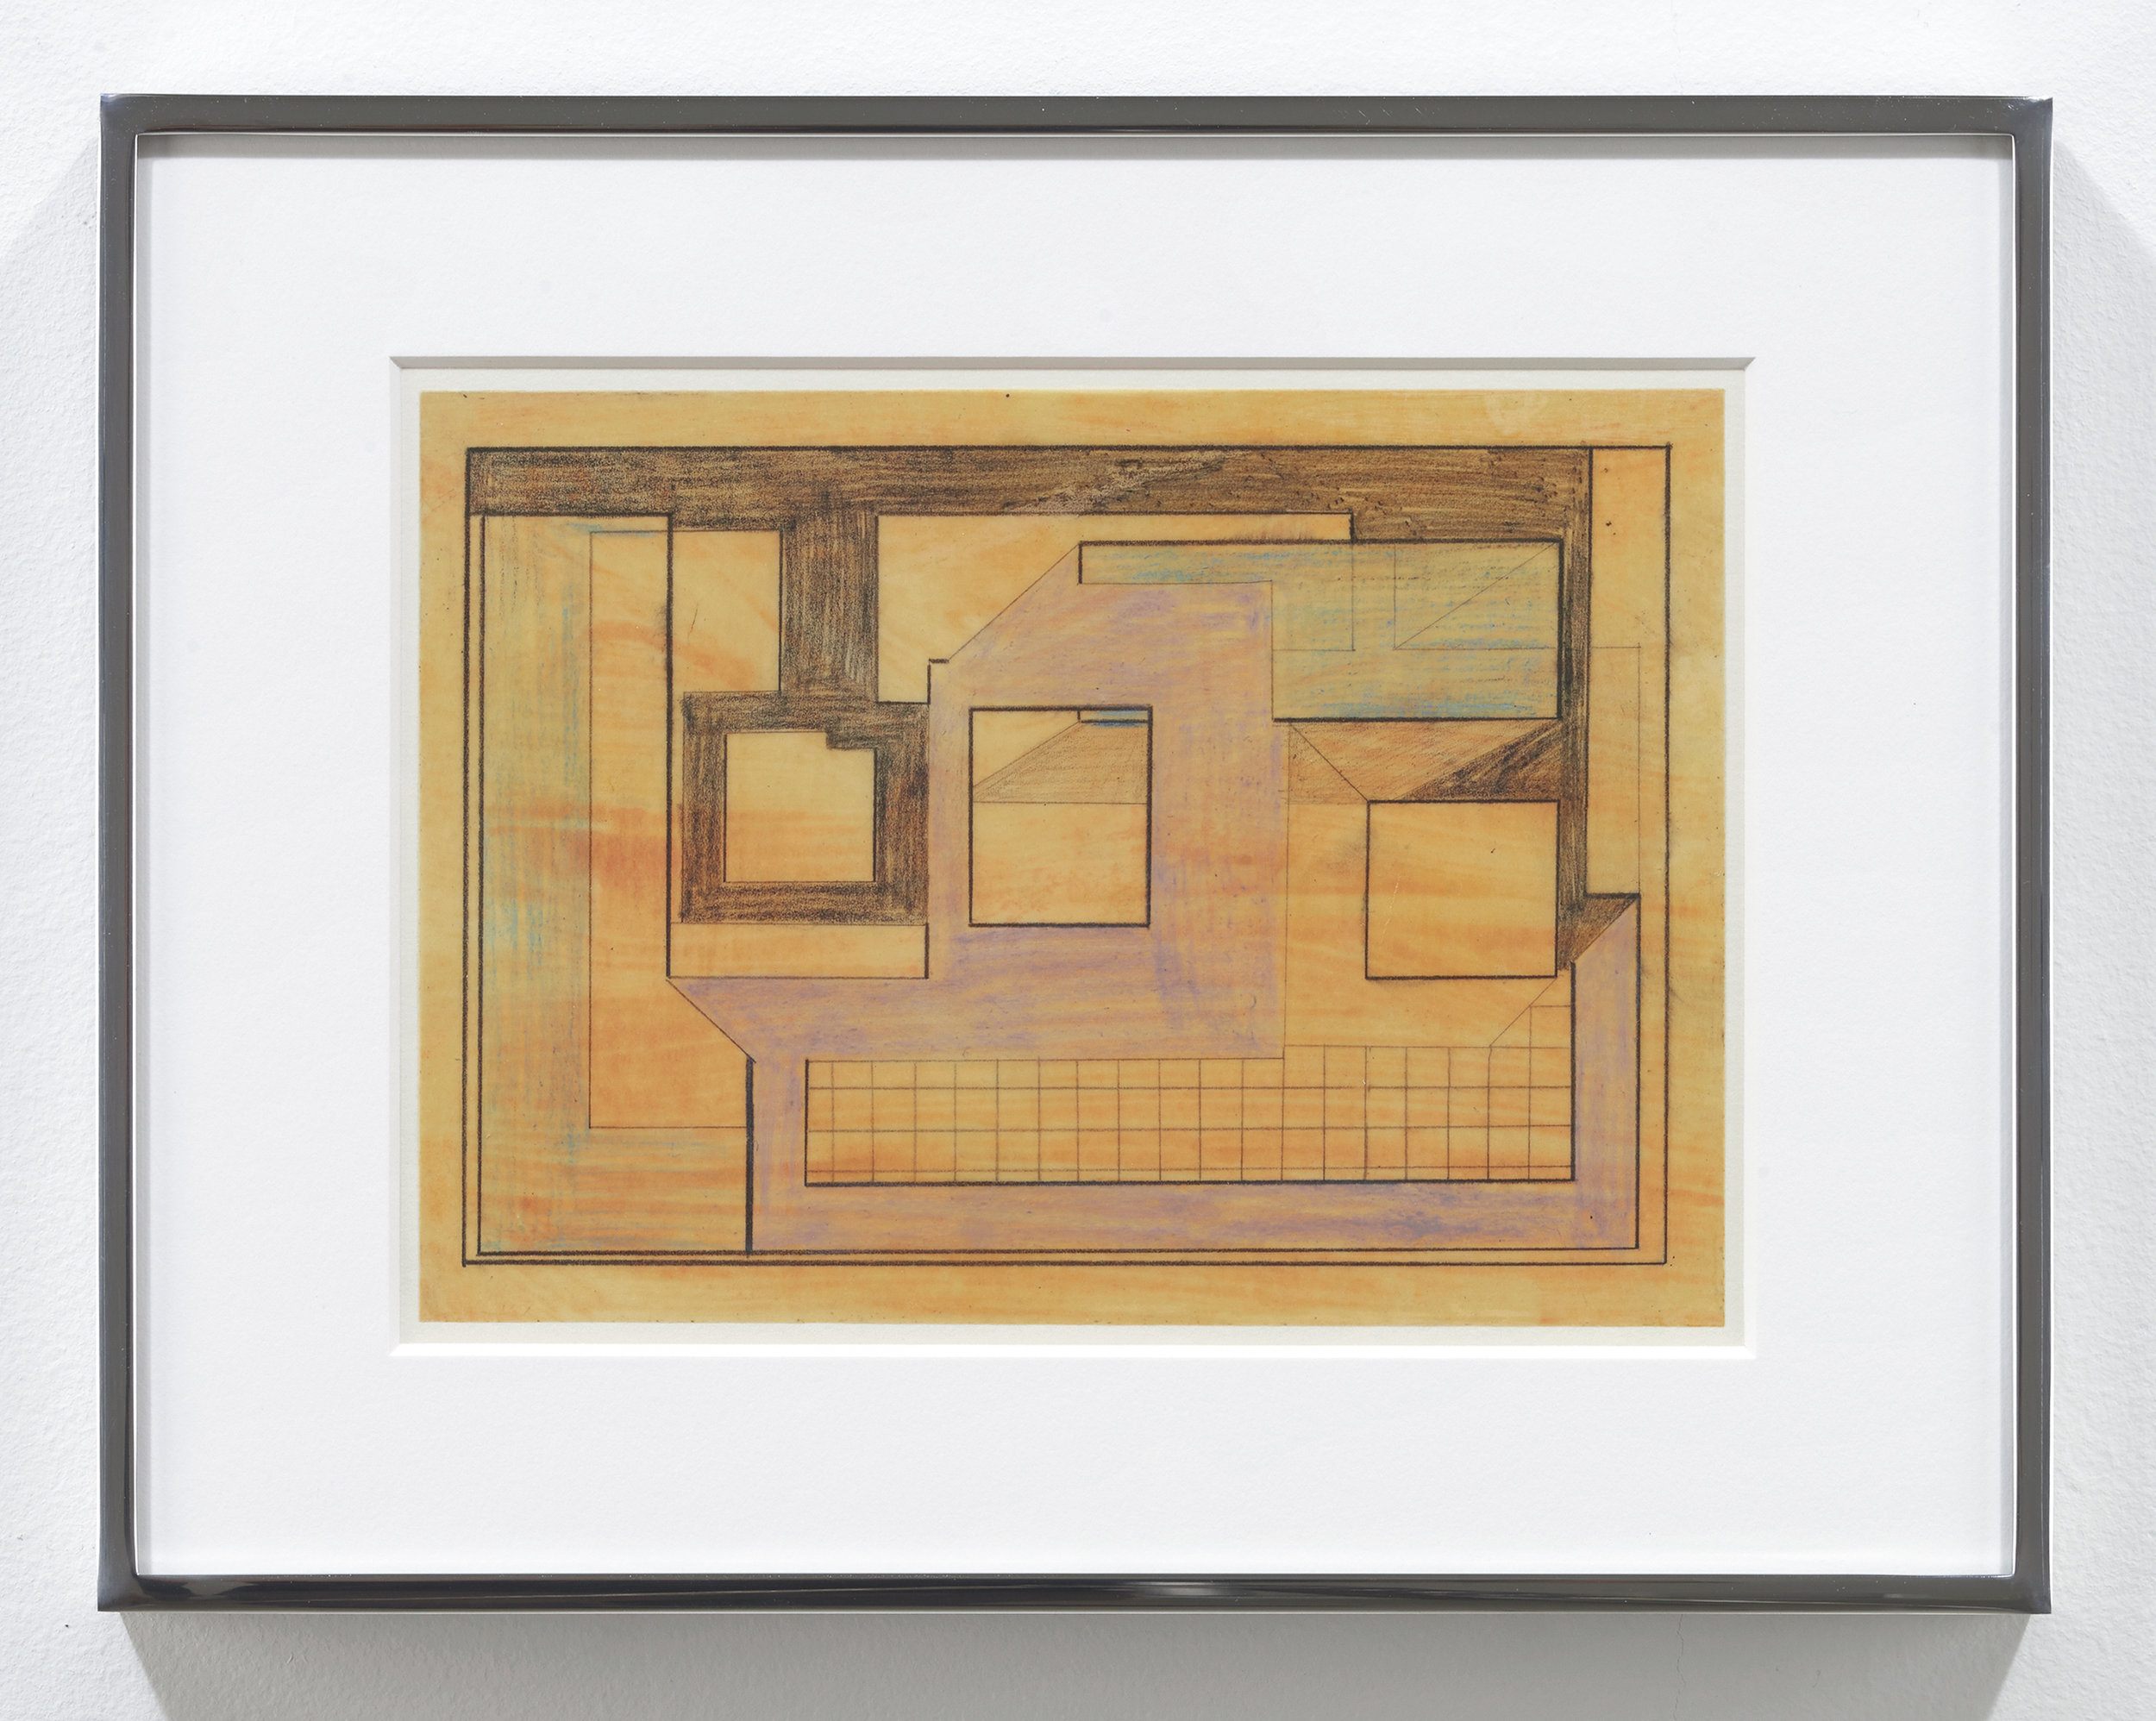  Suzanne Blank Redstone,  Drawing for Portal 2 #3 , 1967, Paper, tracing paper, pencil and color pencil, Framed dimensions: 8.75 x 11.25 inches 